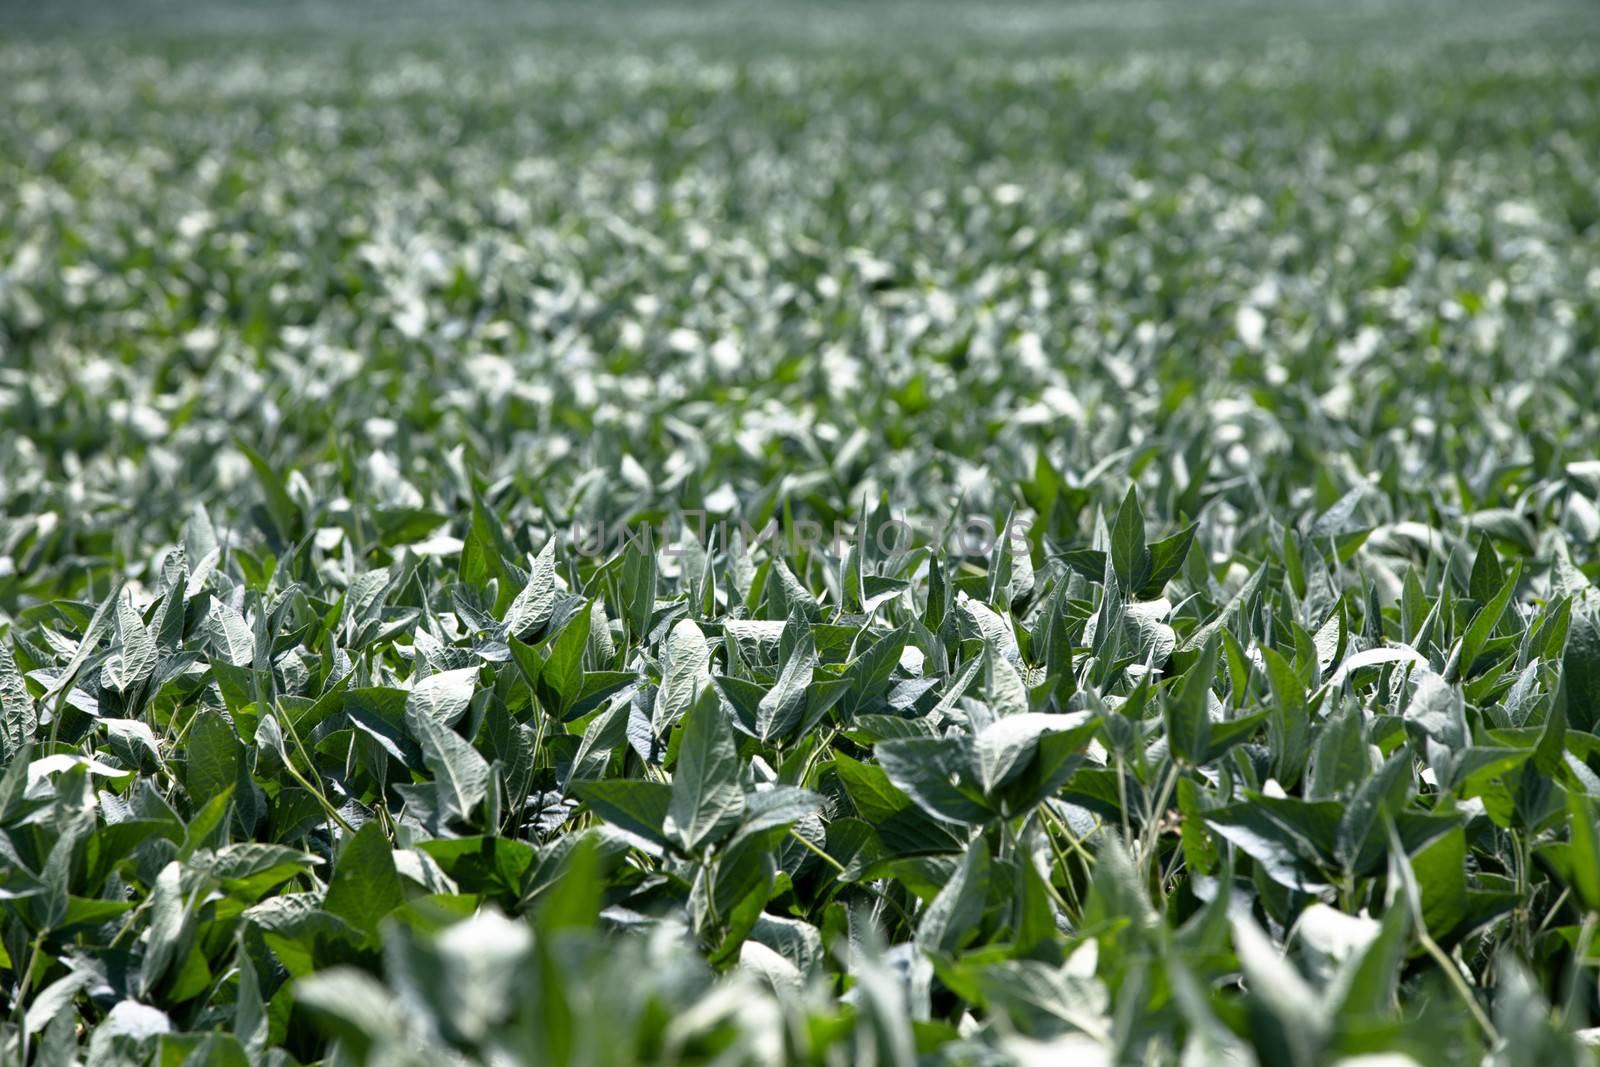 Healthy crop of green leafy vegetables growing in an agricultural field in the summer sunshine, background view with shallow dof